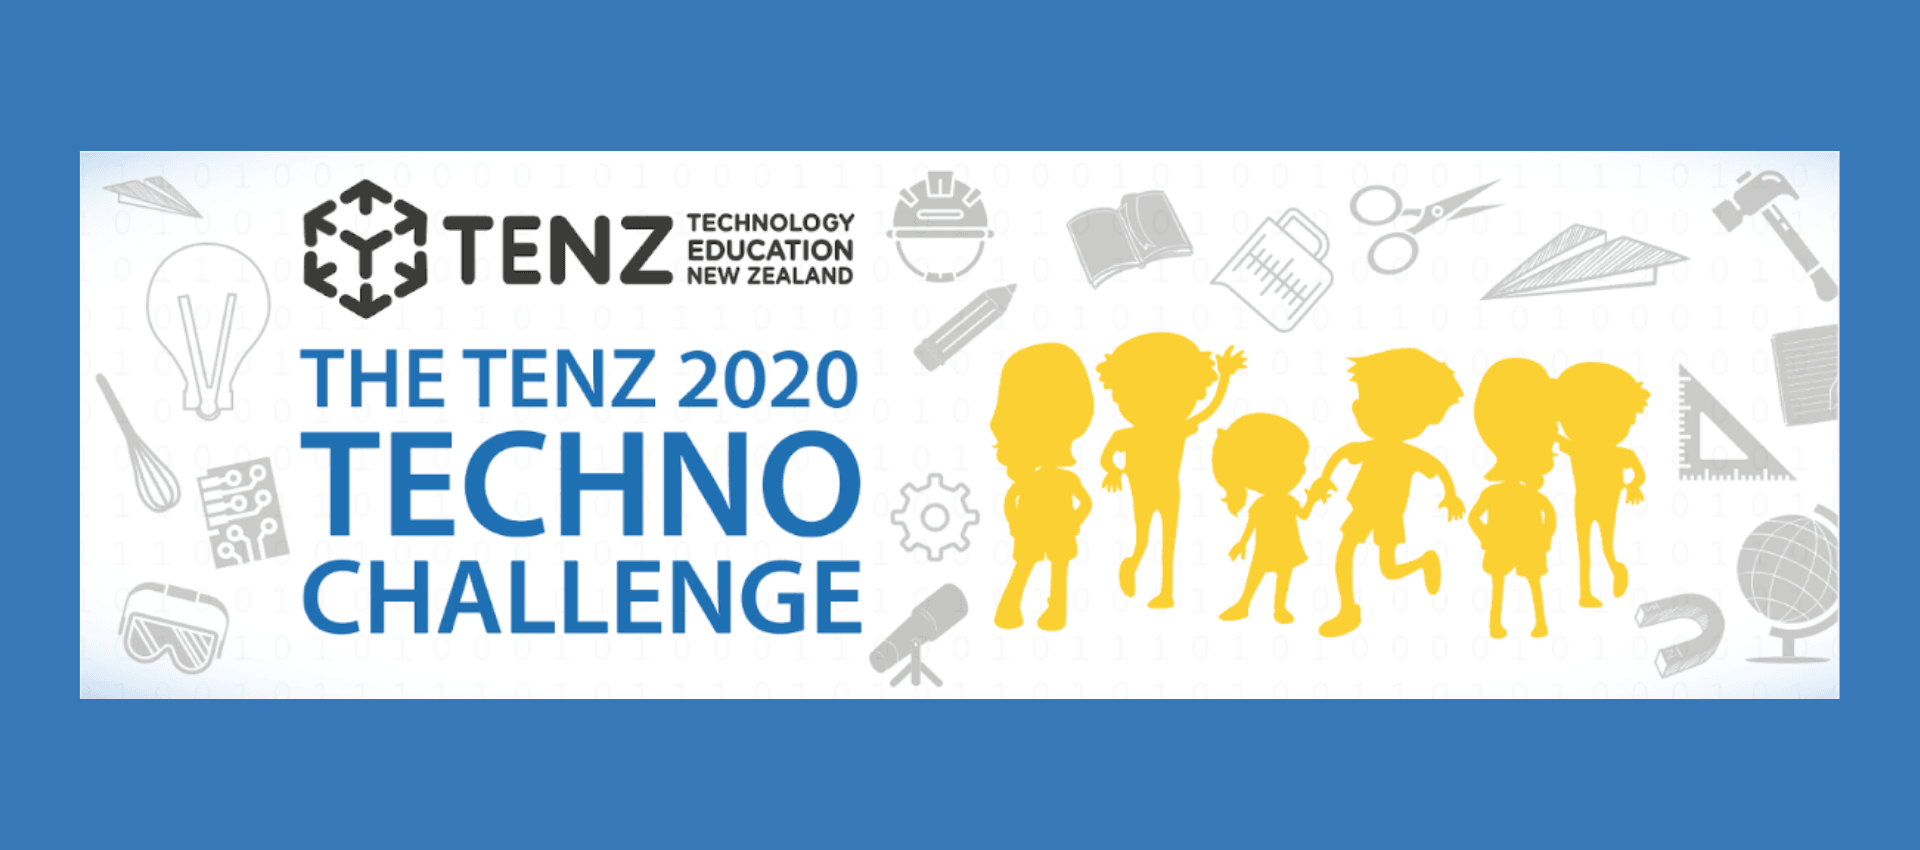 We're Proud Platinum Sponsors for the TENZ Techno Challenge 2020